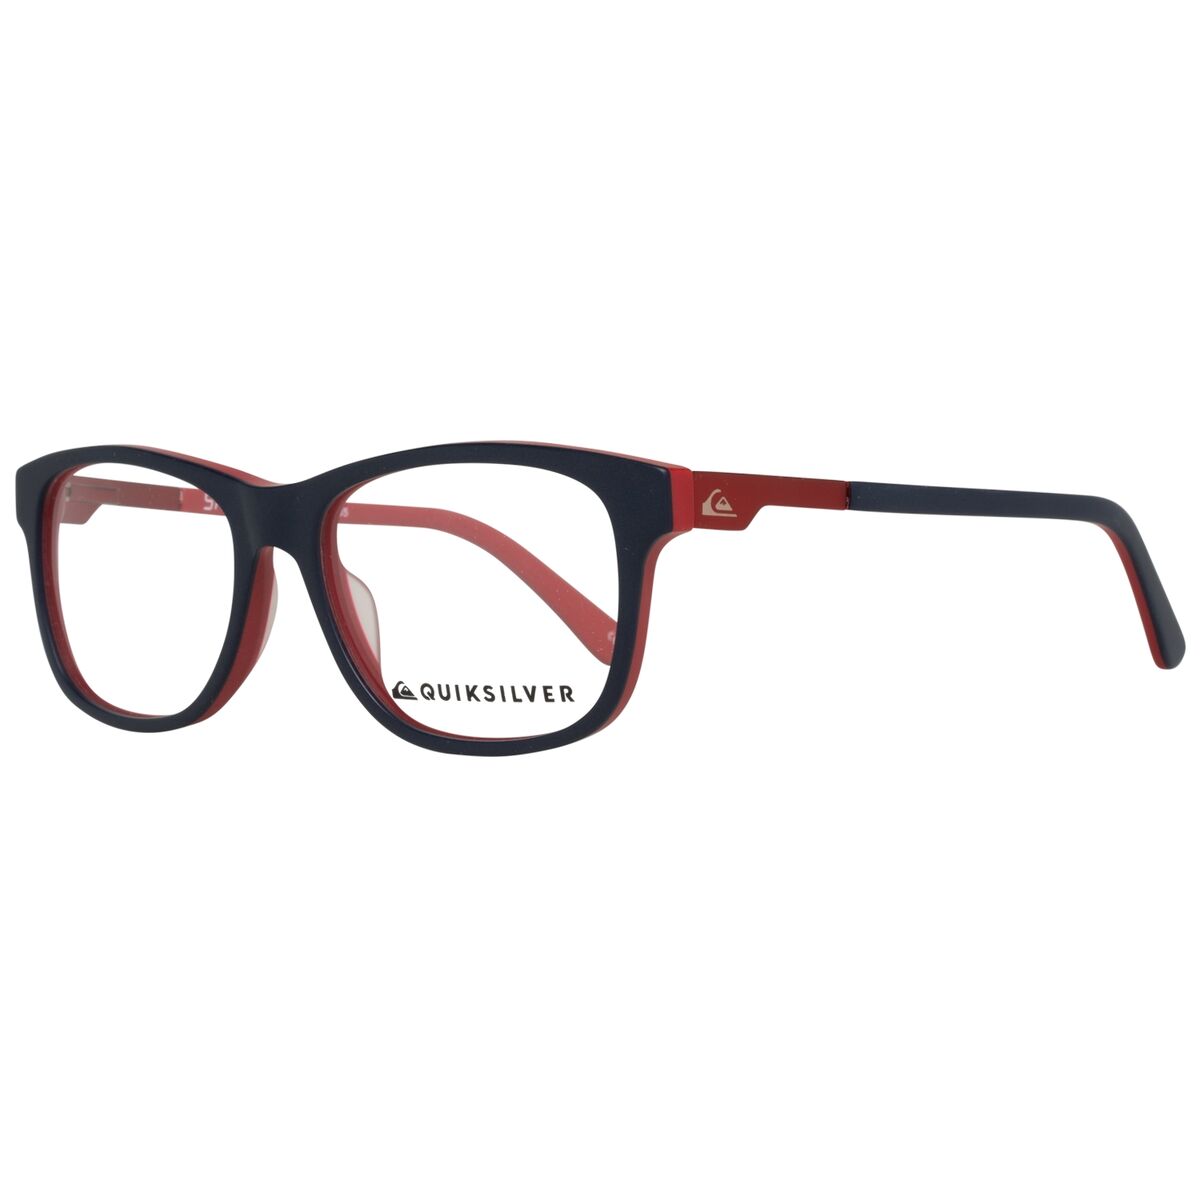 Men' Spectacle frame QuikSilver EQYEG03064 50ARED